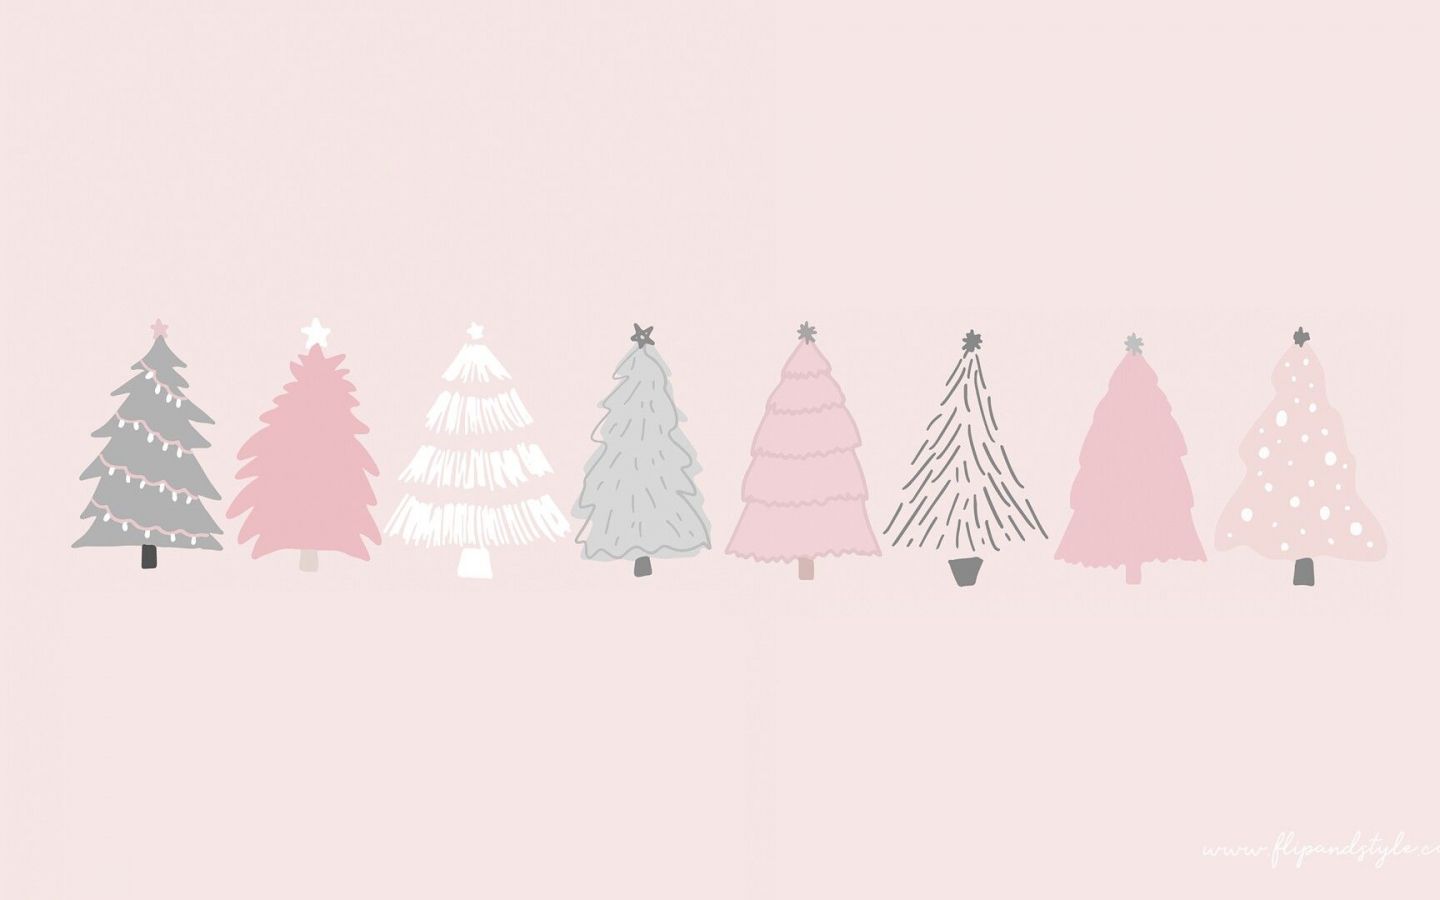 A pink and white poster with christmas trees - Christmas